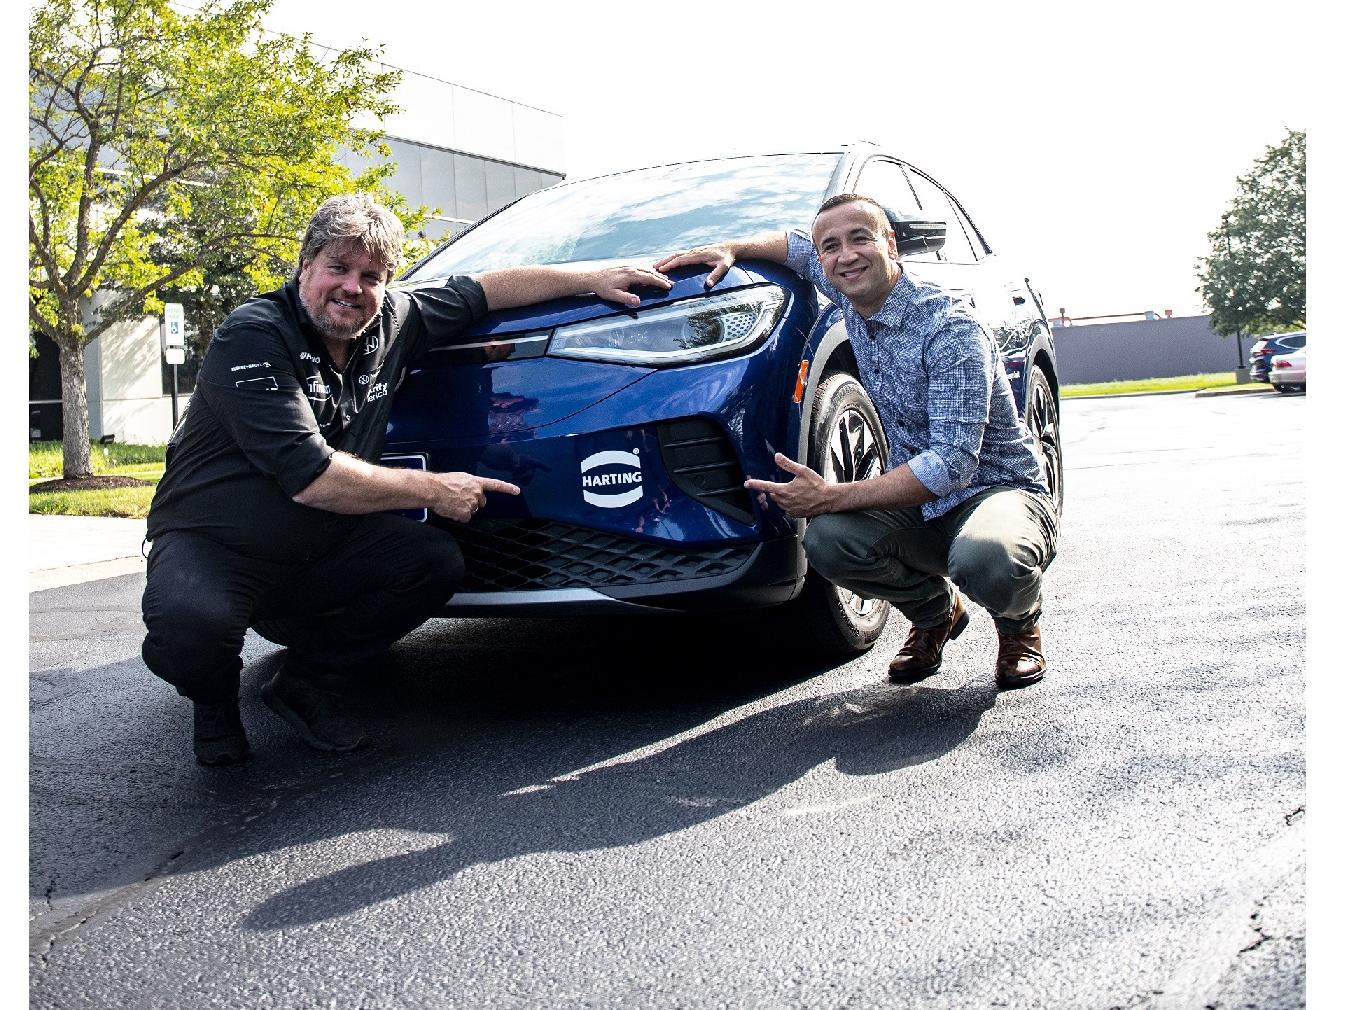 EV drive across US achieves GUINNESS WORLD RECORDS title